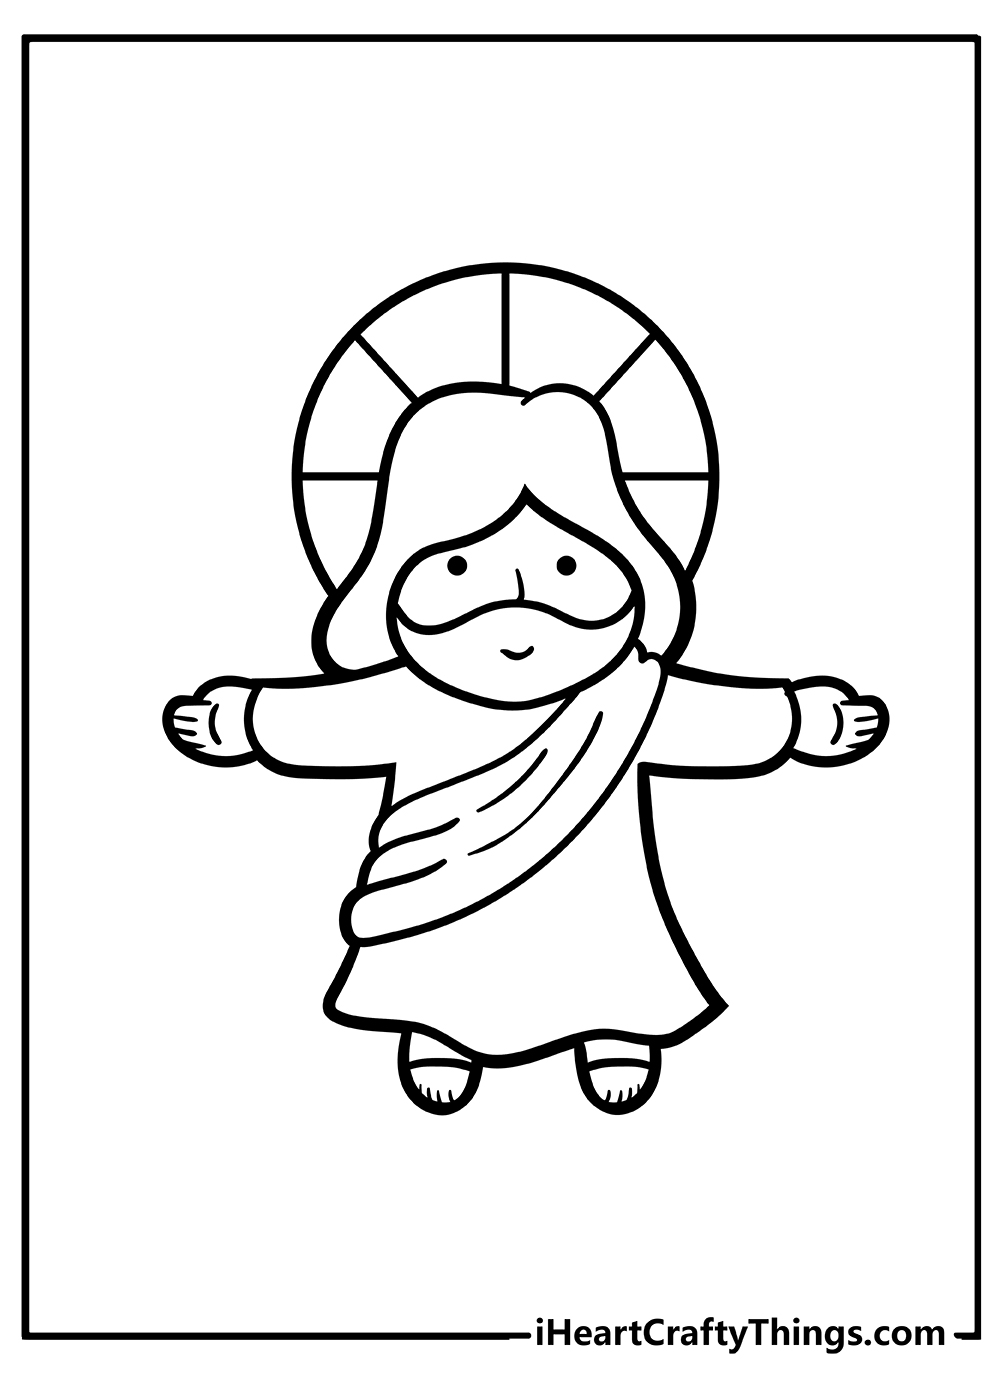 Jesus Coloring Pages for kids free download